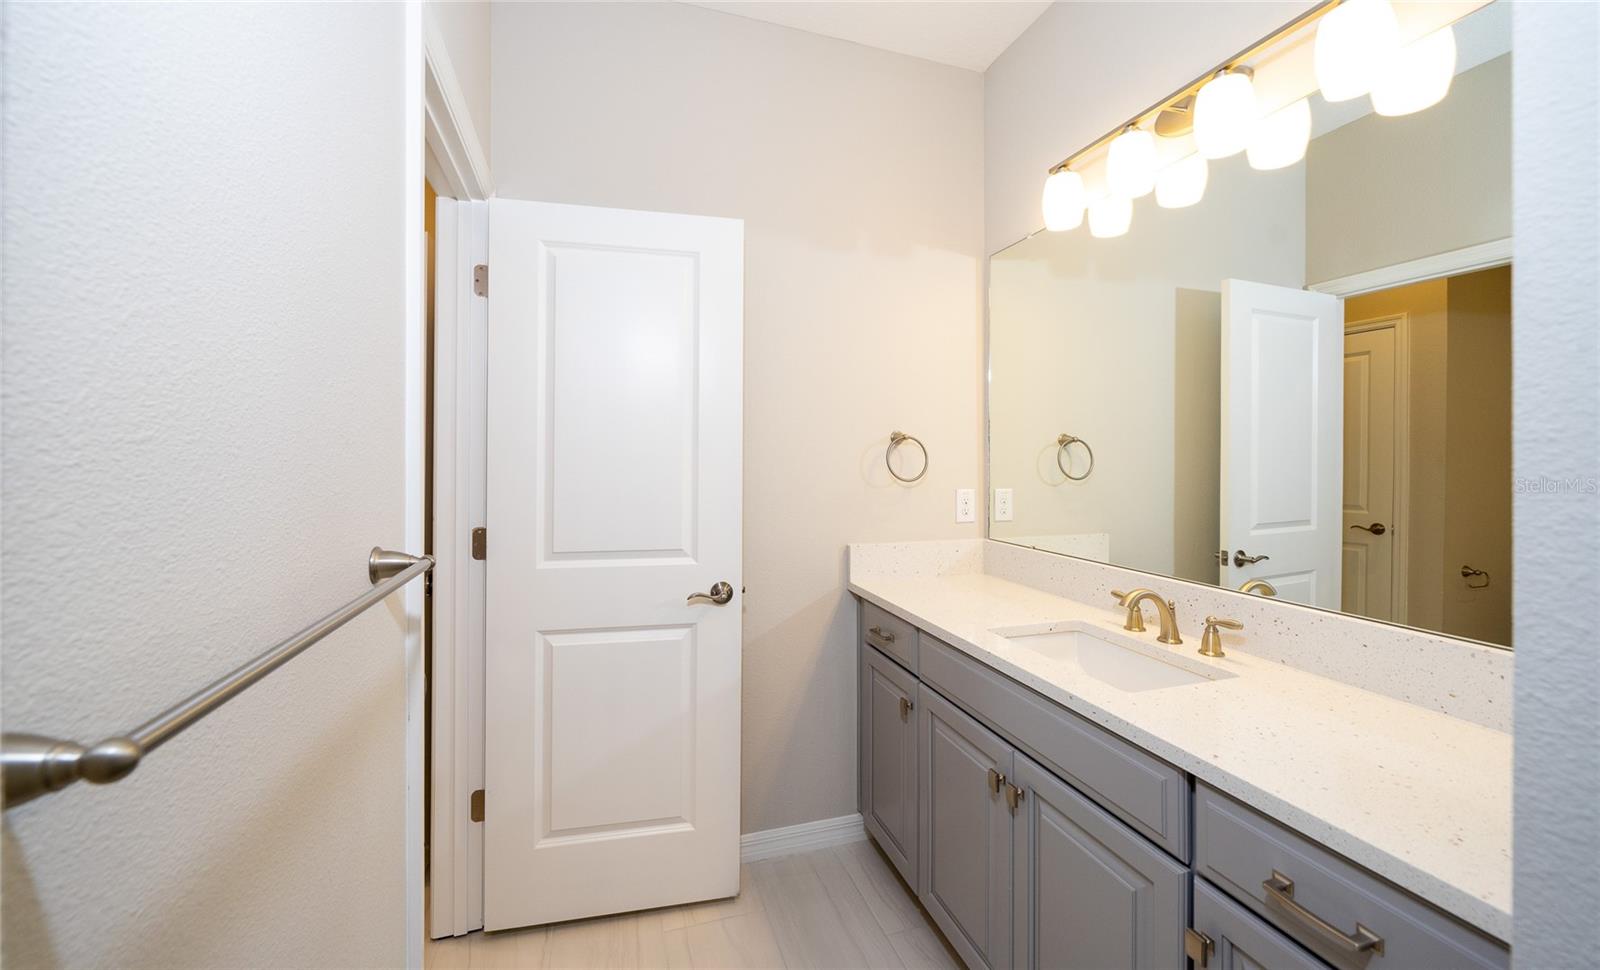 Private Vanity area for each bedroom